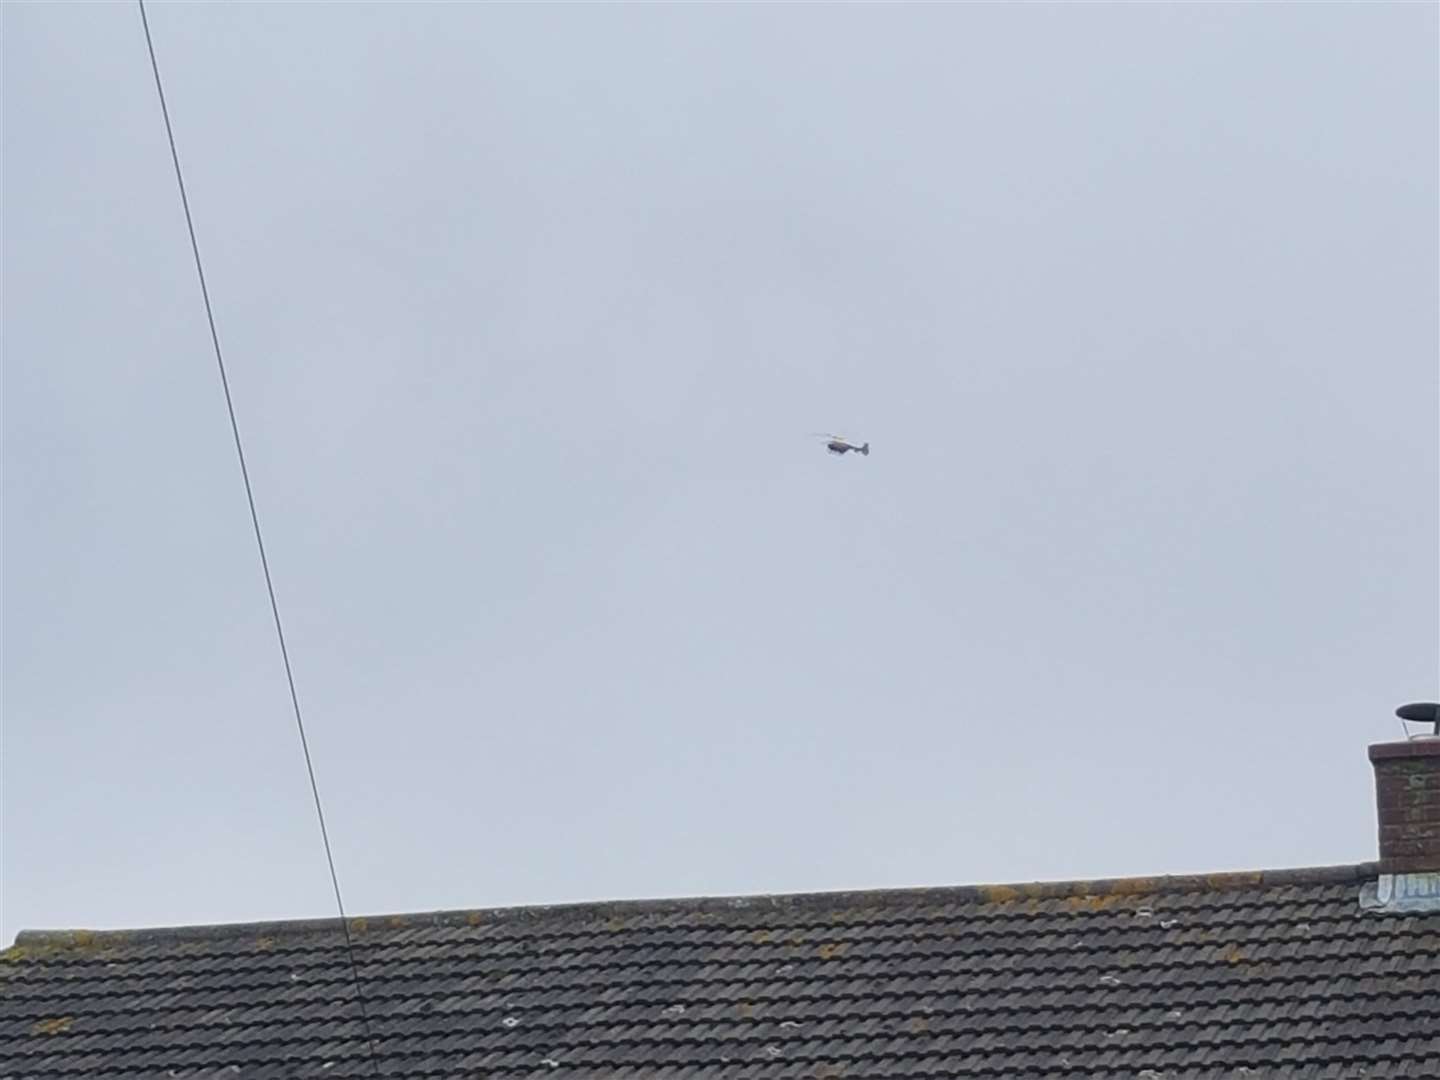 A police helicopter pictured above Eythorne this morning